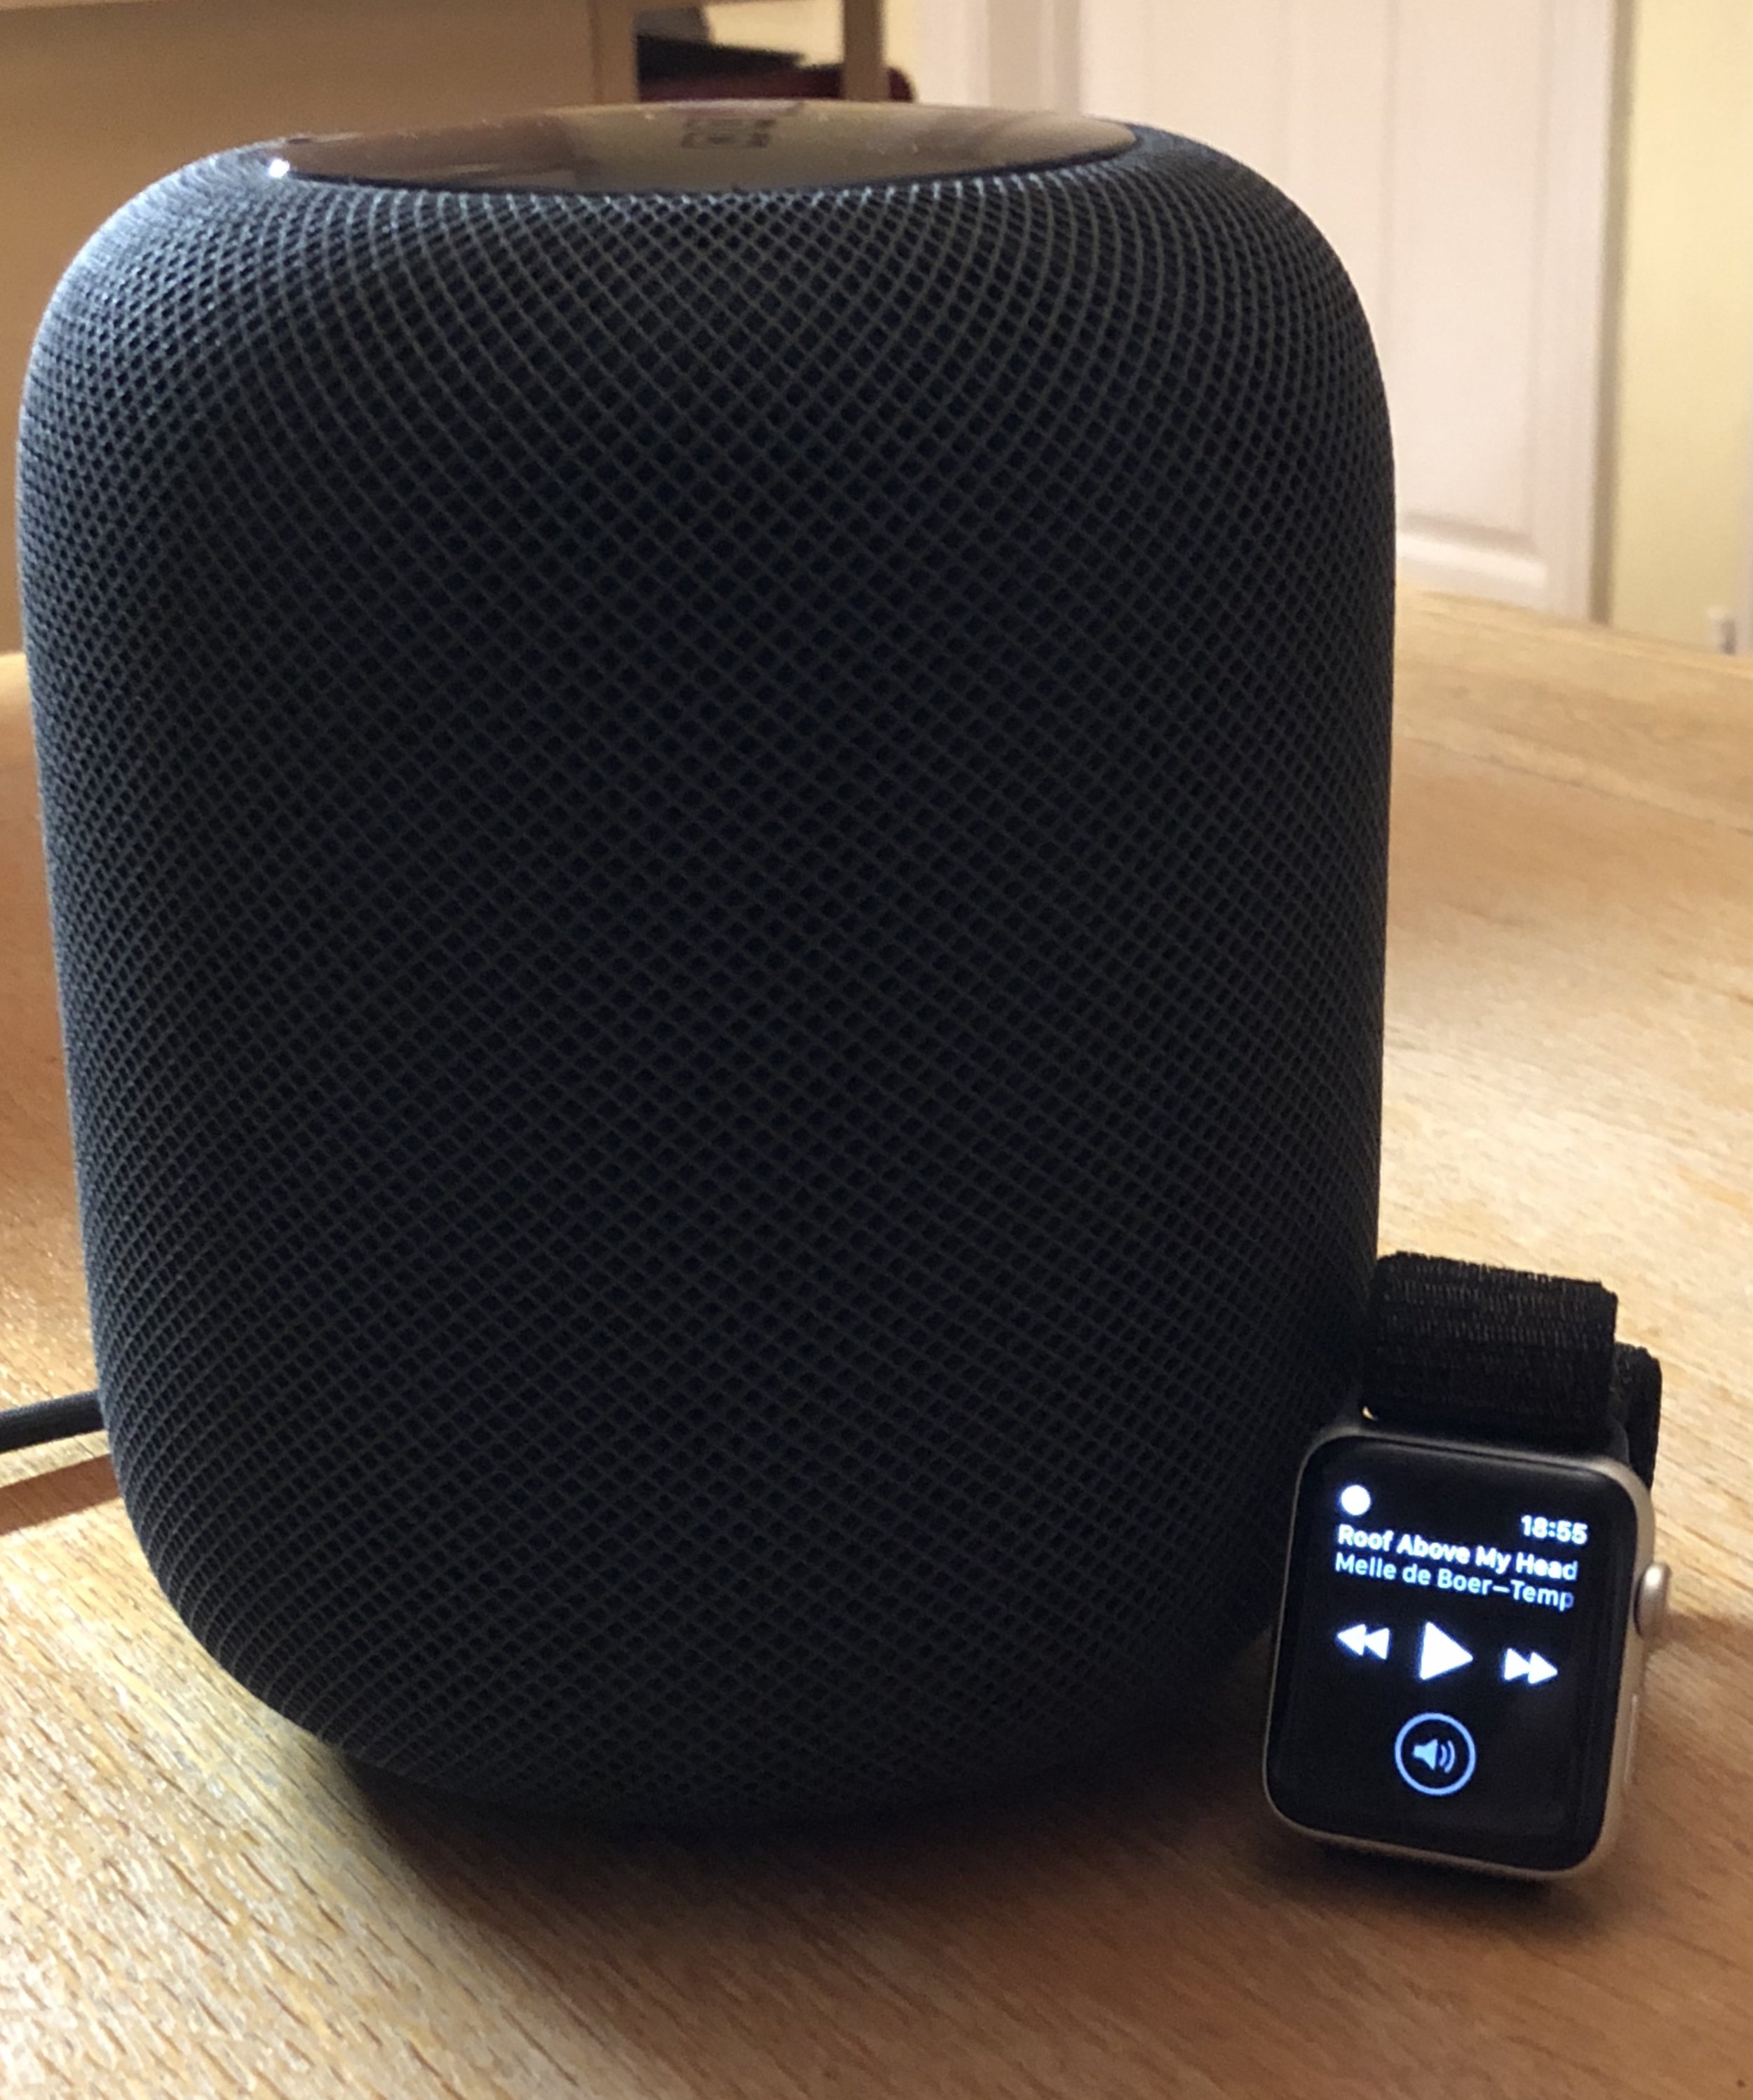 Using Apple Watch to Control HomePod 